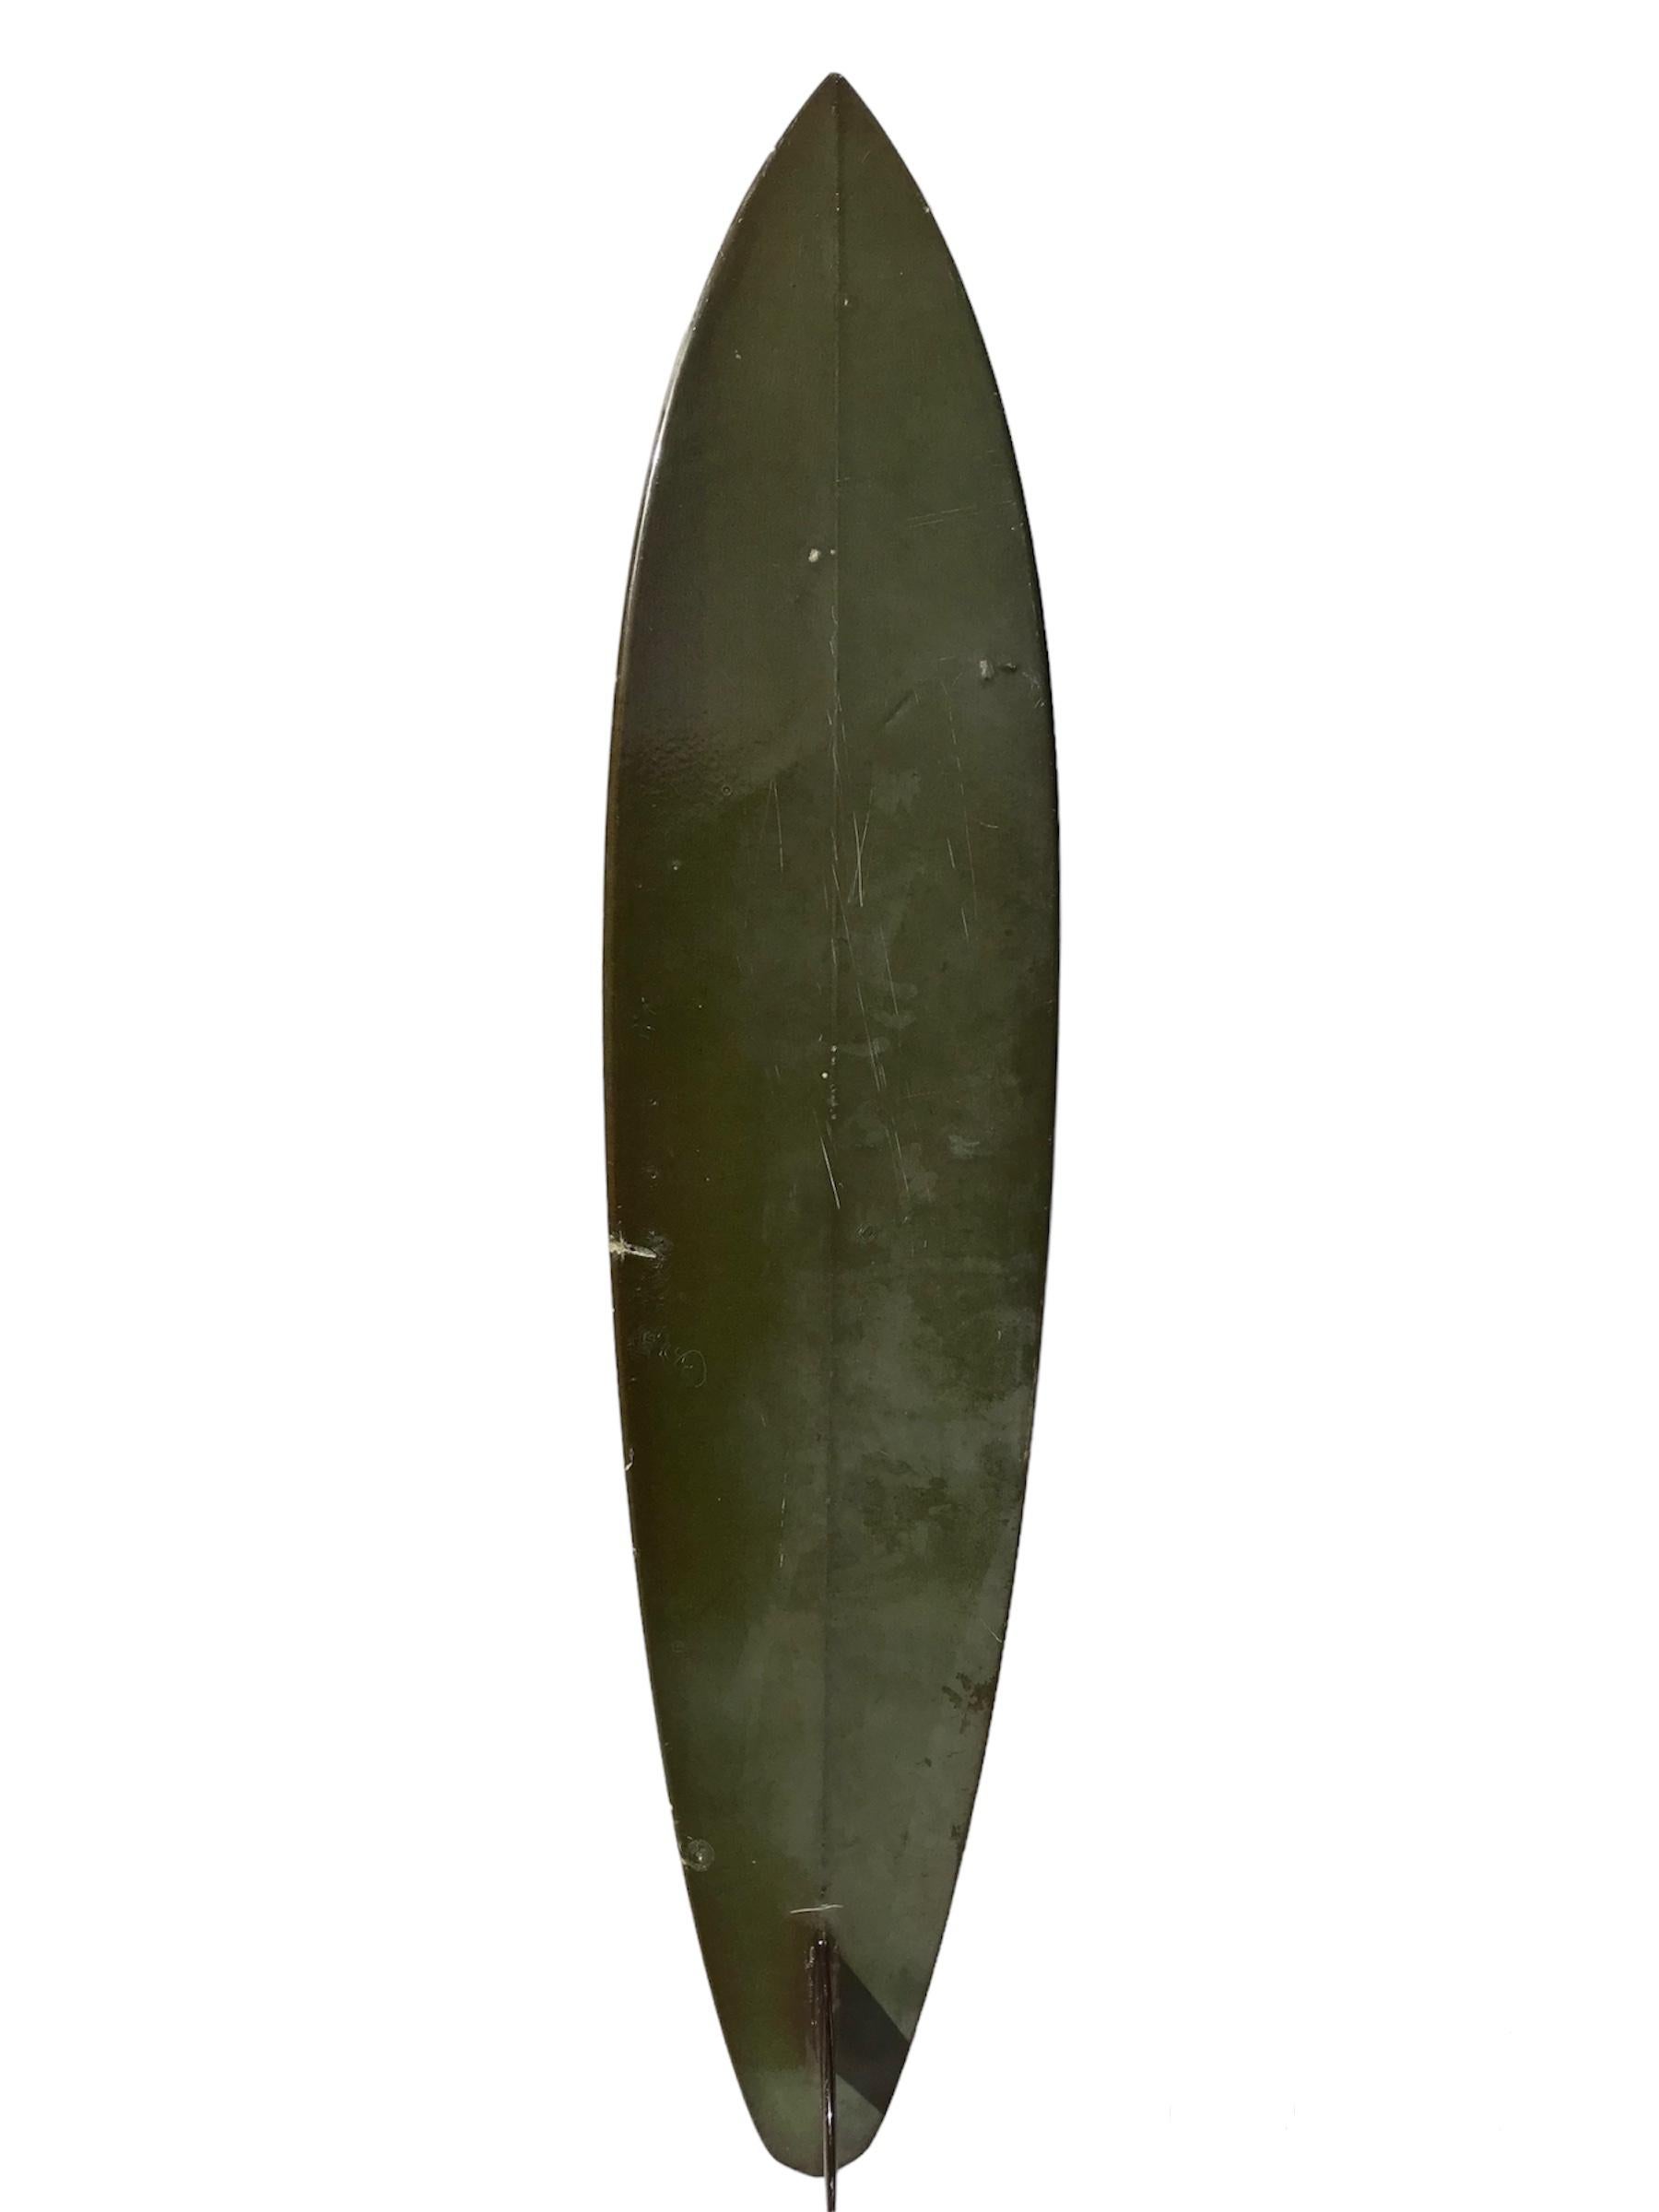 Mid-1970s Vintage Gerry Lopez Lightning Bolt surfboard. Features a vibrant yellow tinted deck with jet-black lightning bolt, ruby red single fin, and diamond tail shape. Originally owned by Gerry Lopez’s friend who played paintball with Gerry and